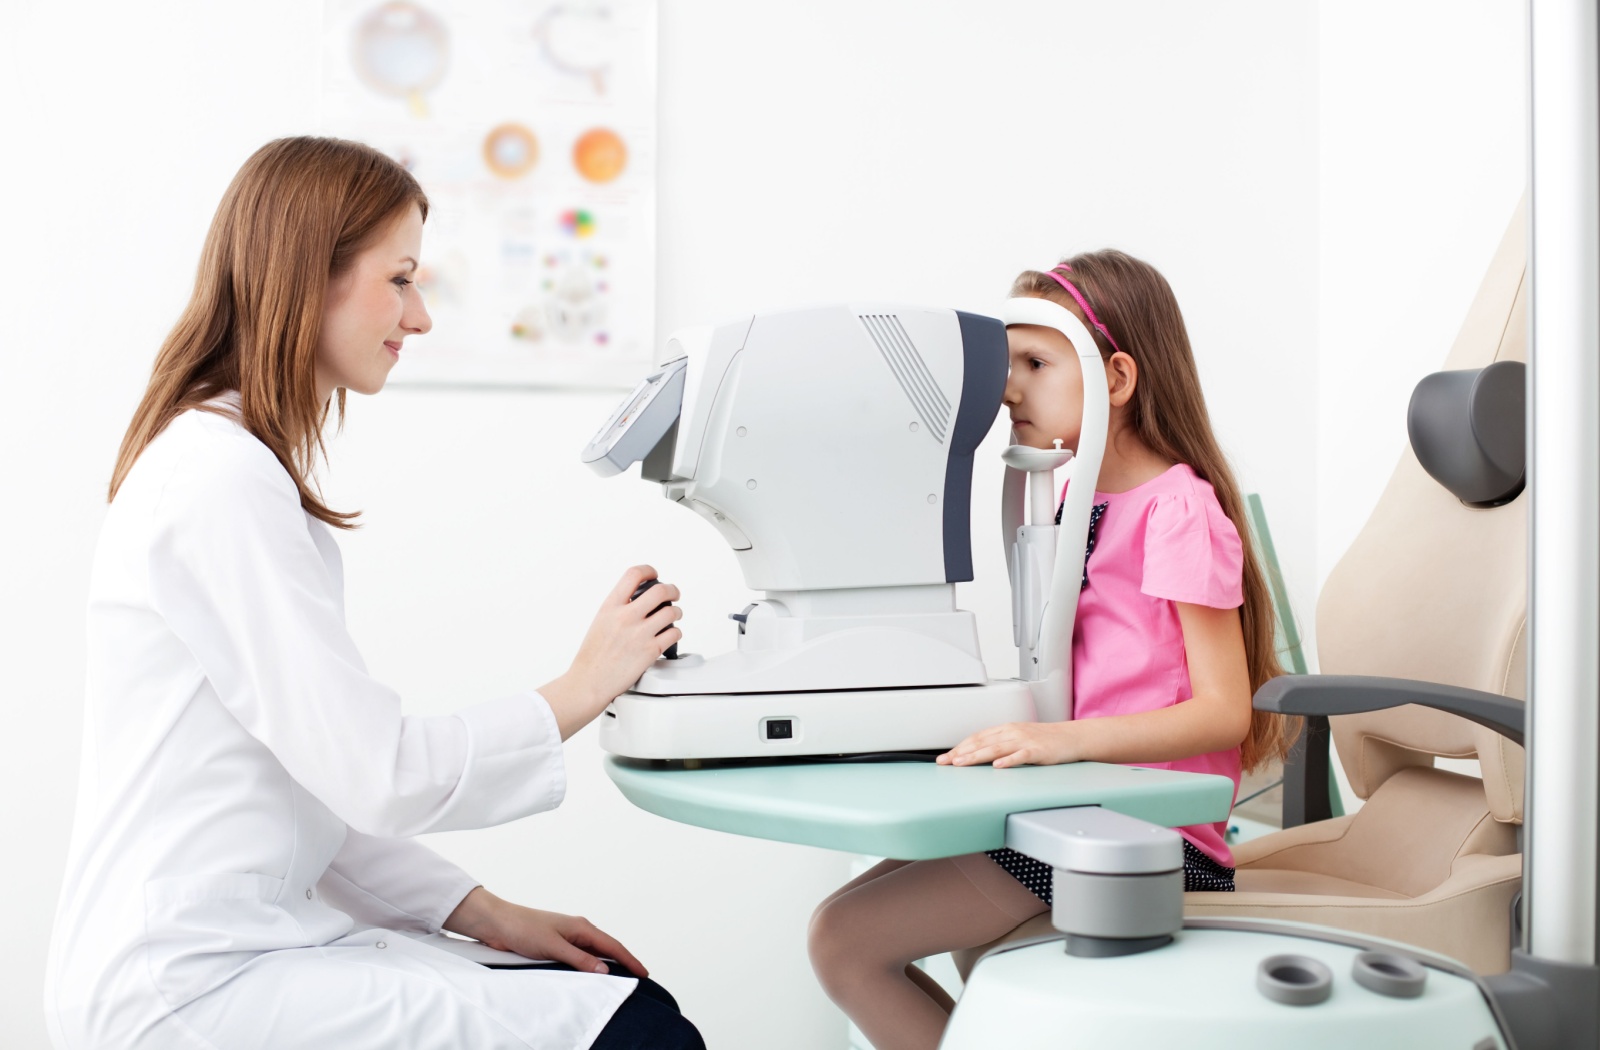 A female optometrist using a medical device to examine the eyes of a child patient and look for potential eye problems.